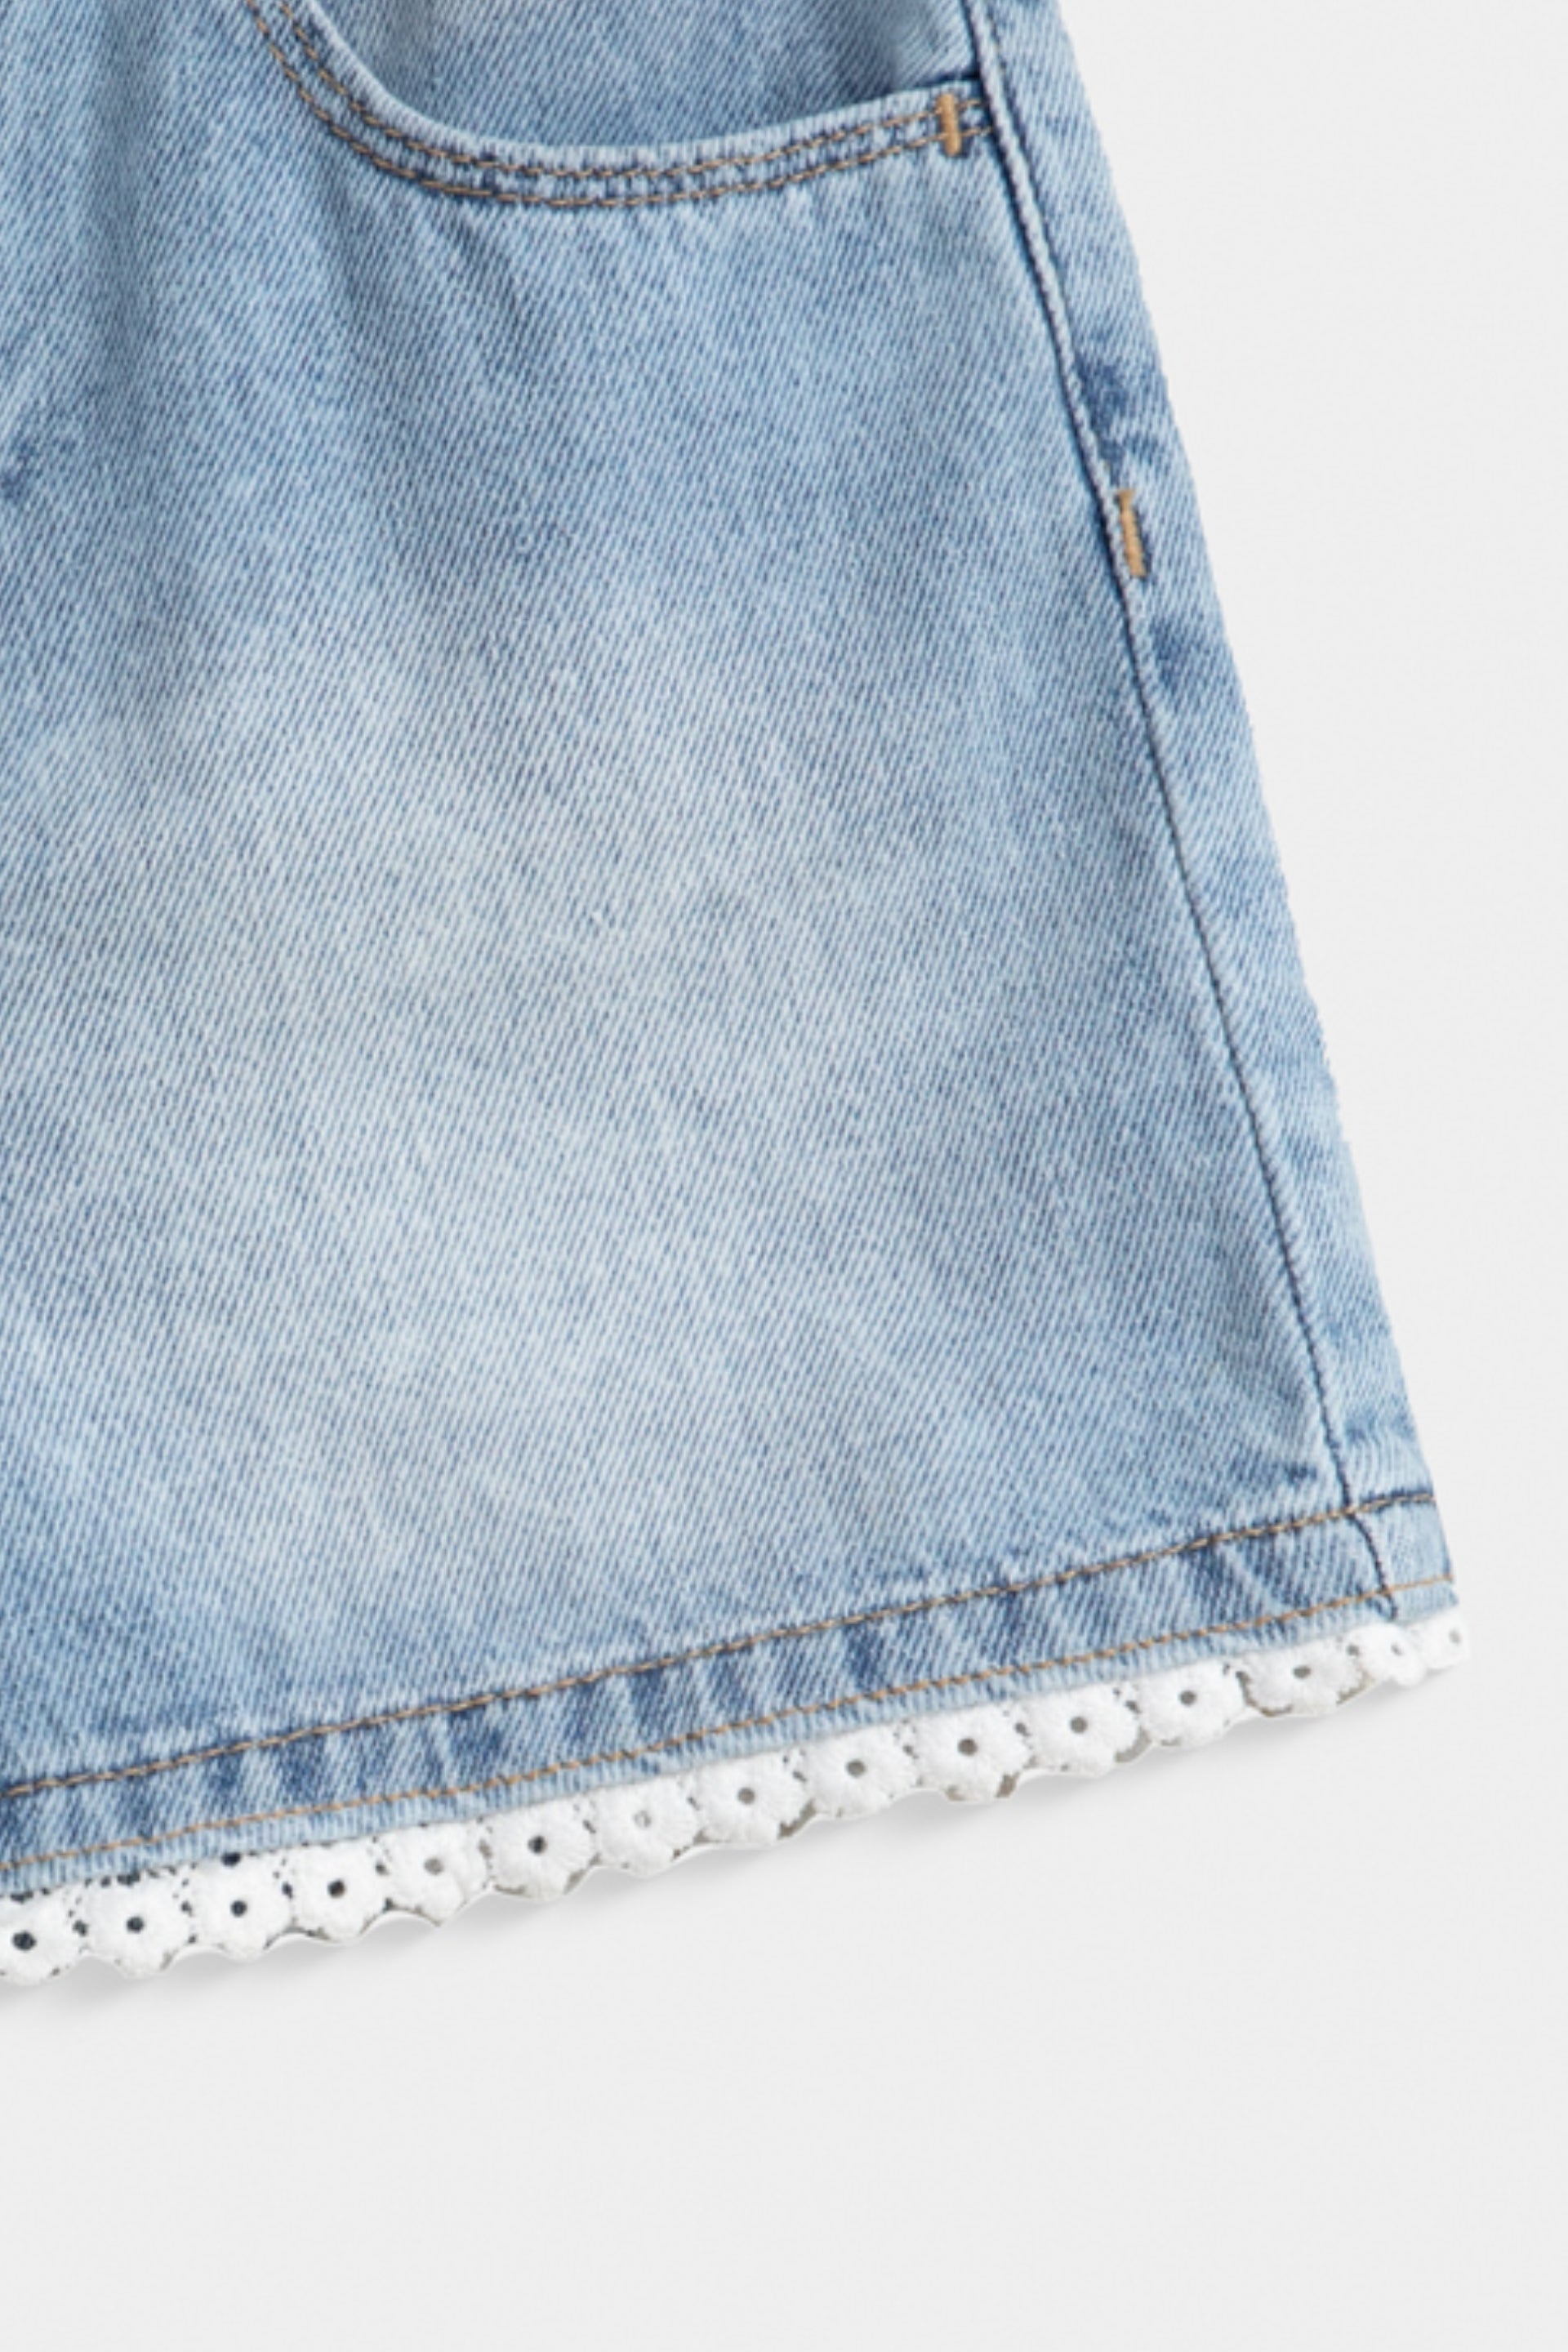 Denim Shorts With Lace Detail On Hem. – Outfitters